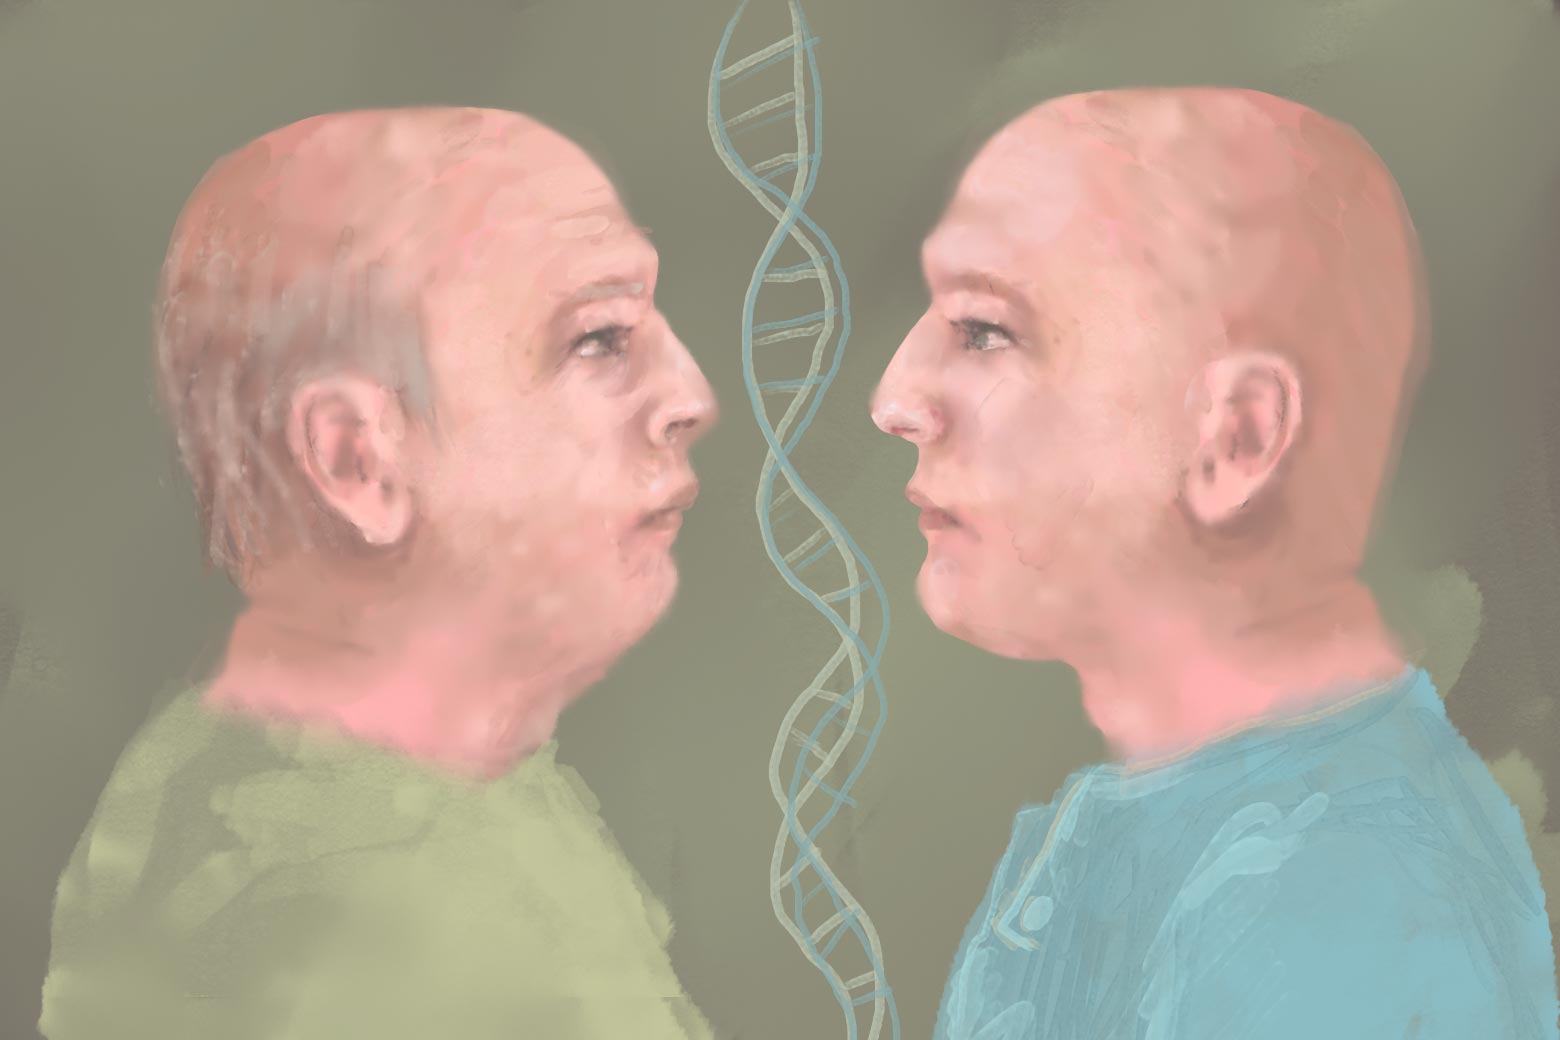 A balding man stares at a mirror-image younger version of himself, with a DNA strand in the background.